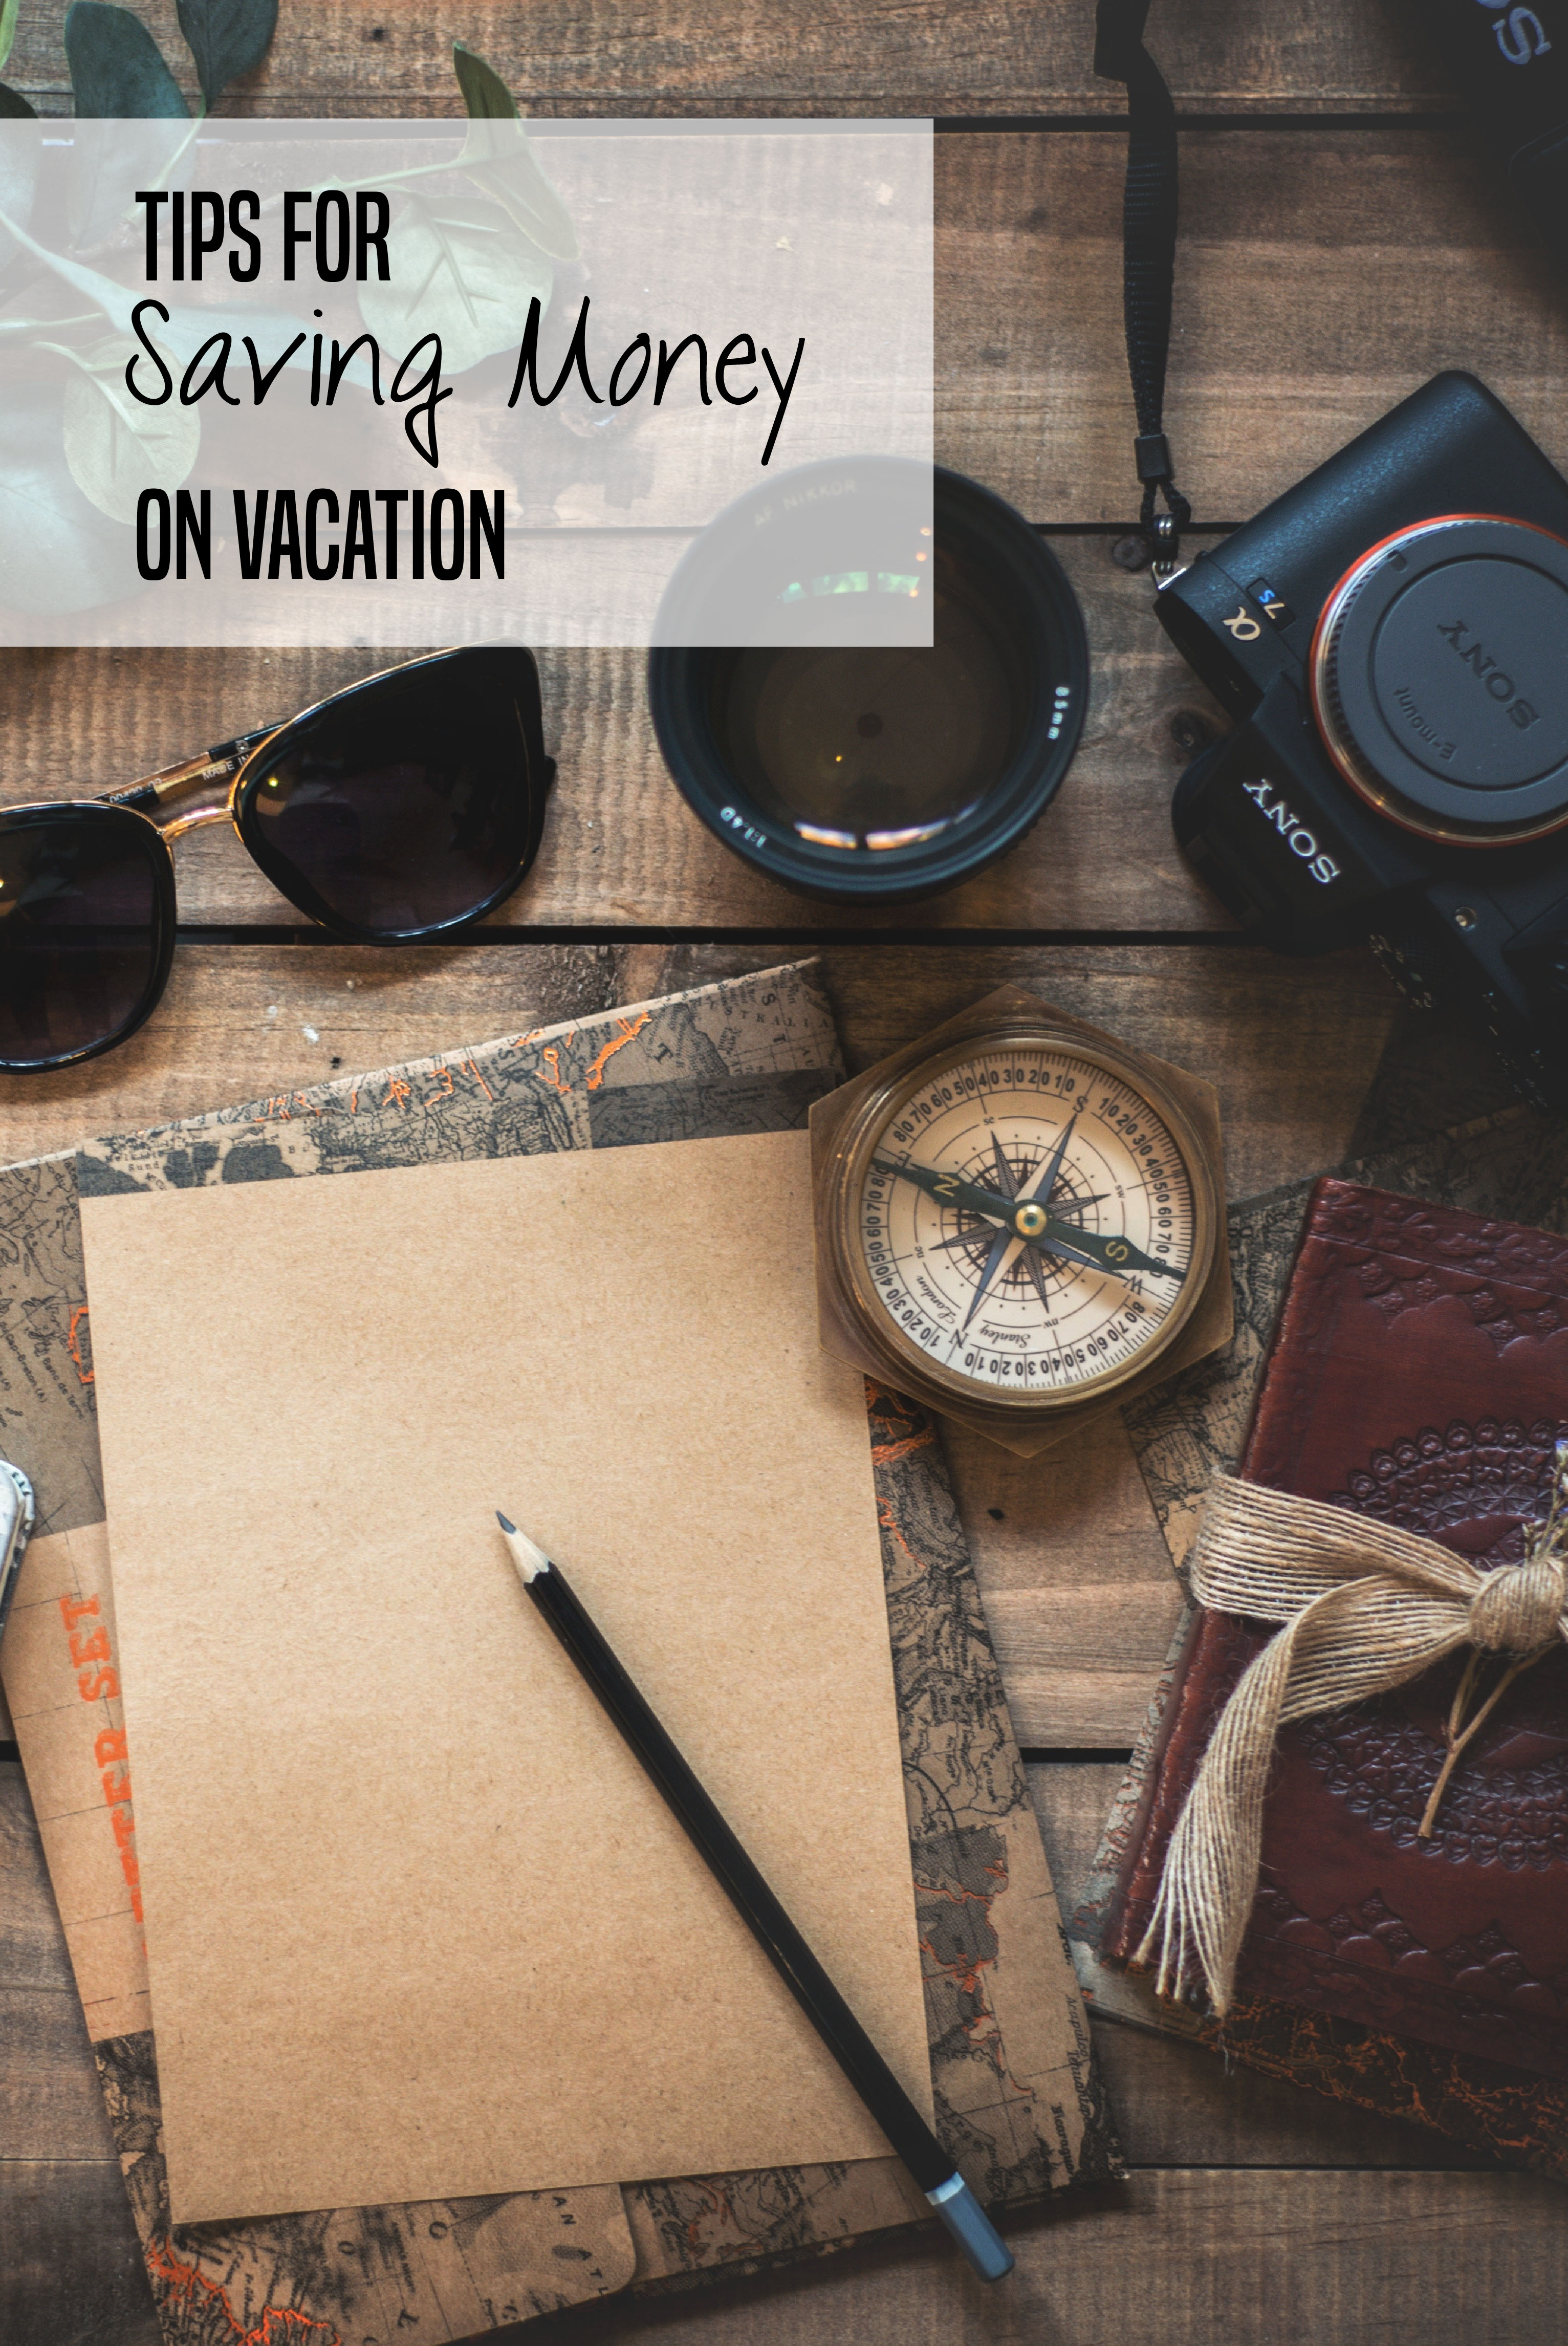 Tips for saving money on vacation